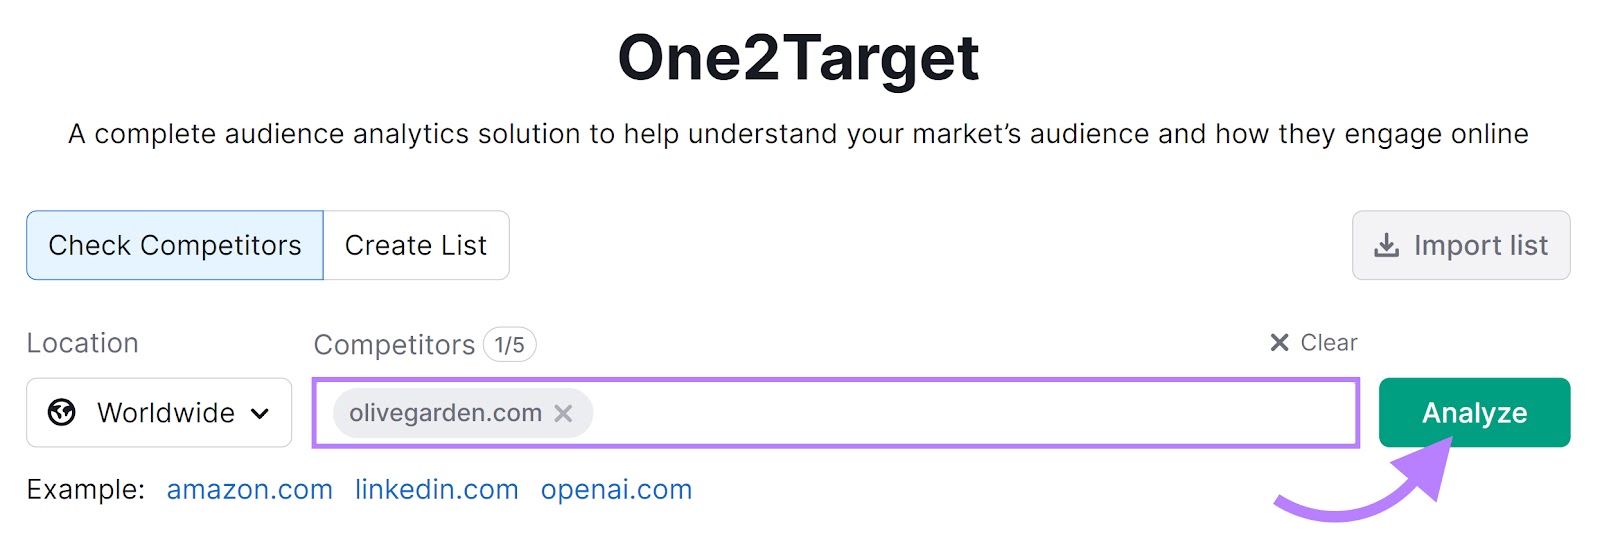 One2Target tool with "olivegarden.com" in the "Competitors" field and an arrow pointing to the "Analyze" button.